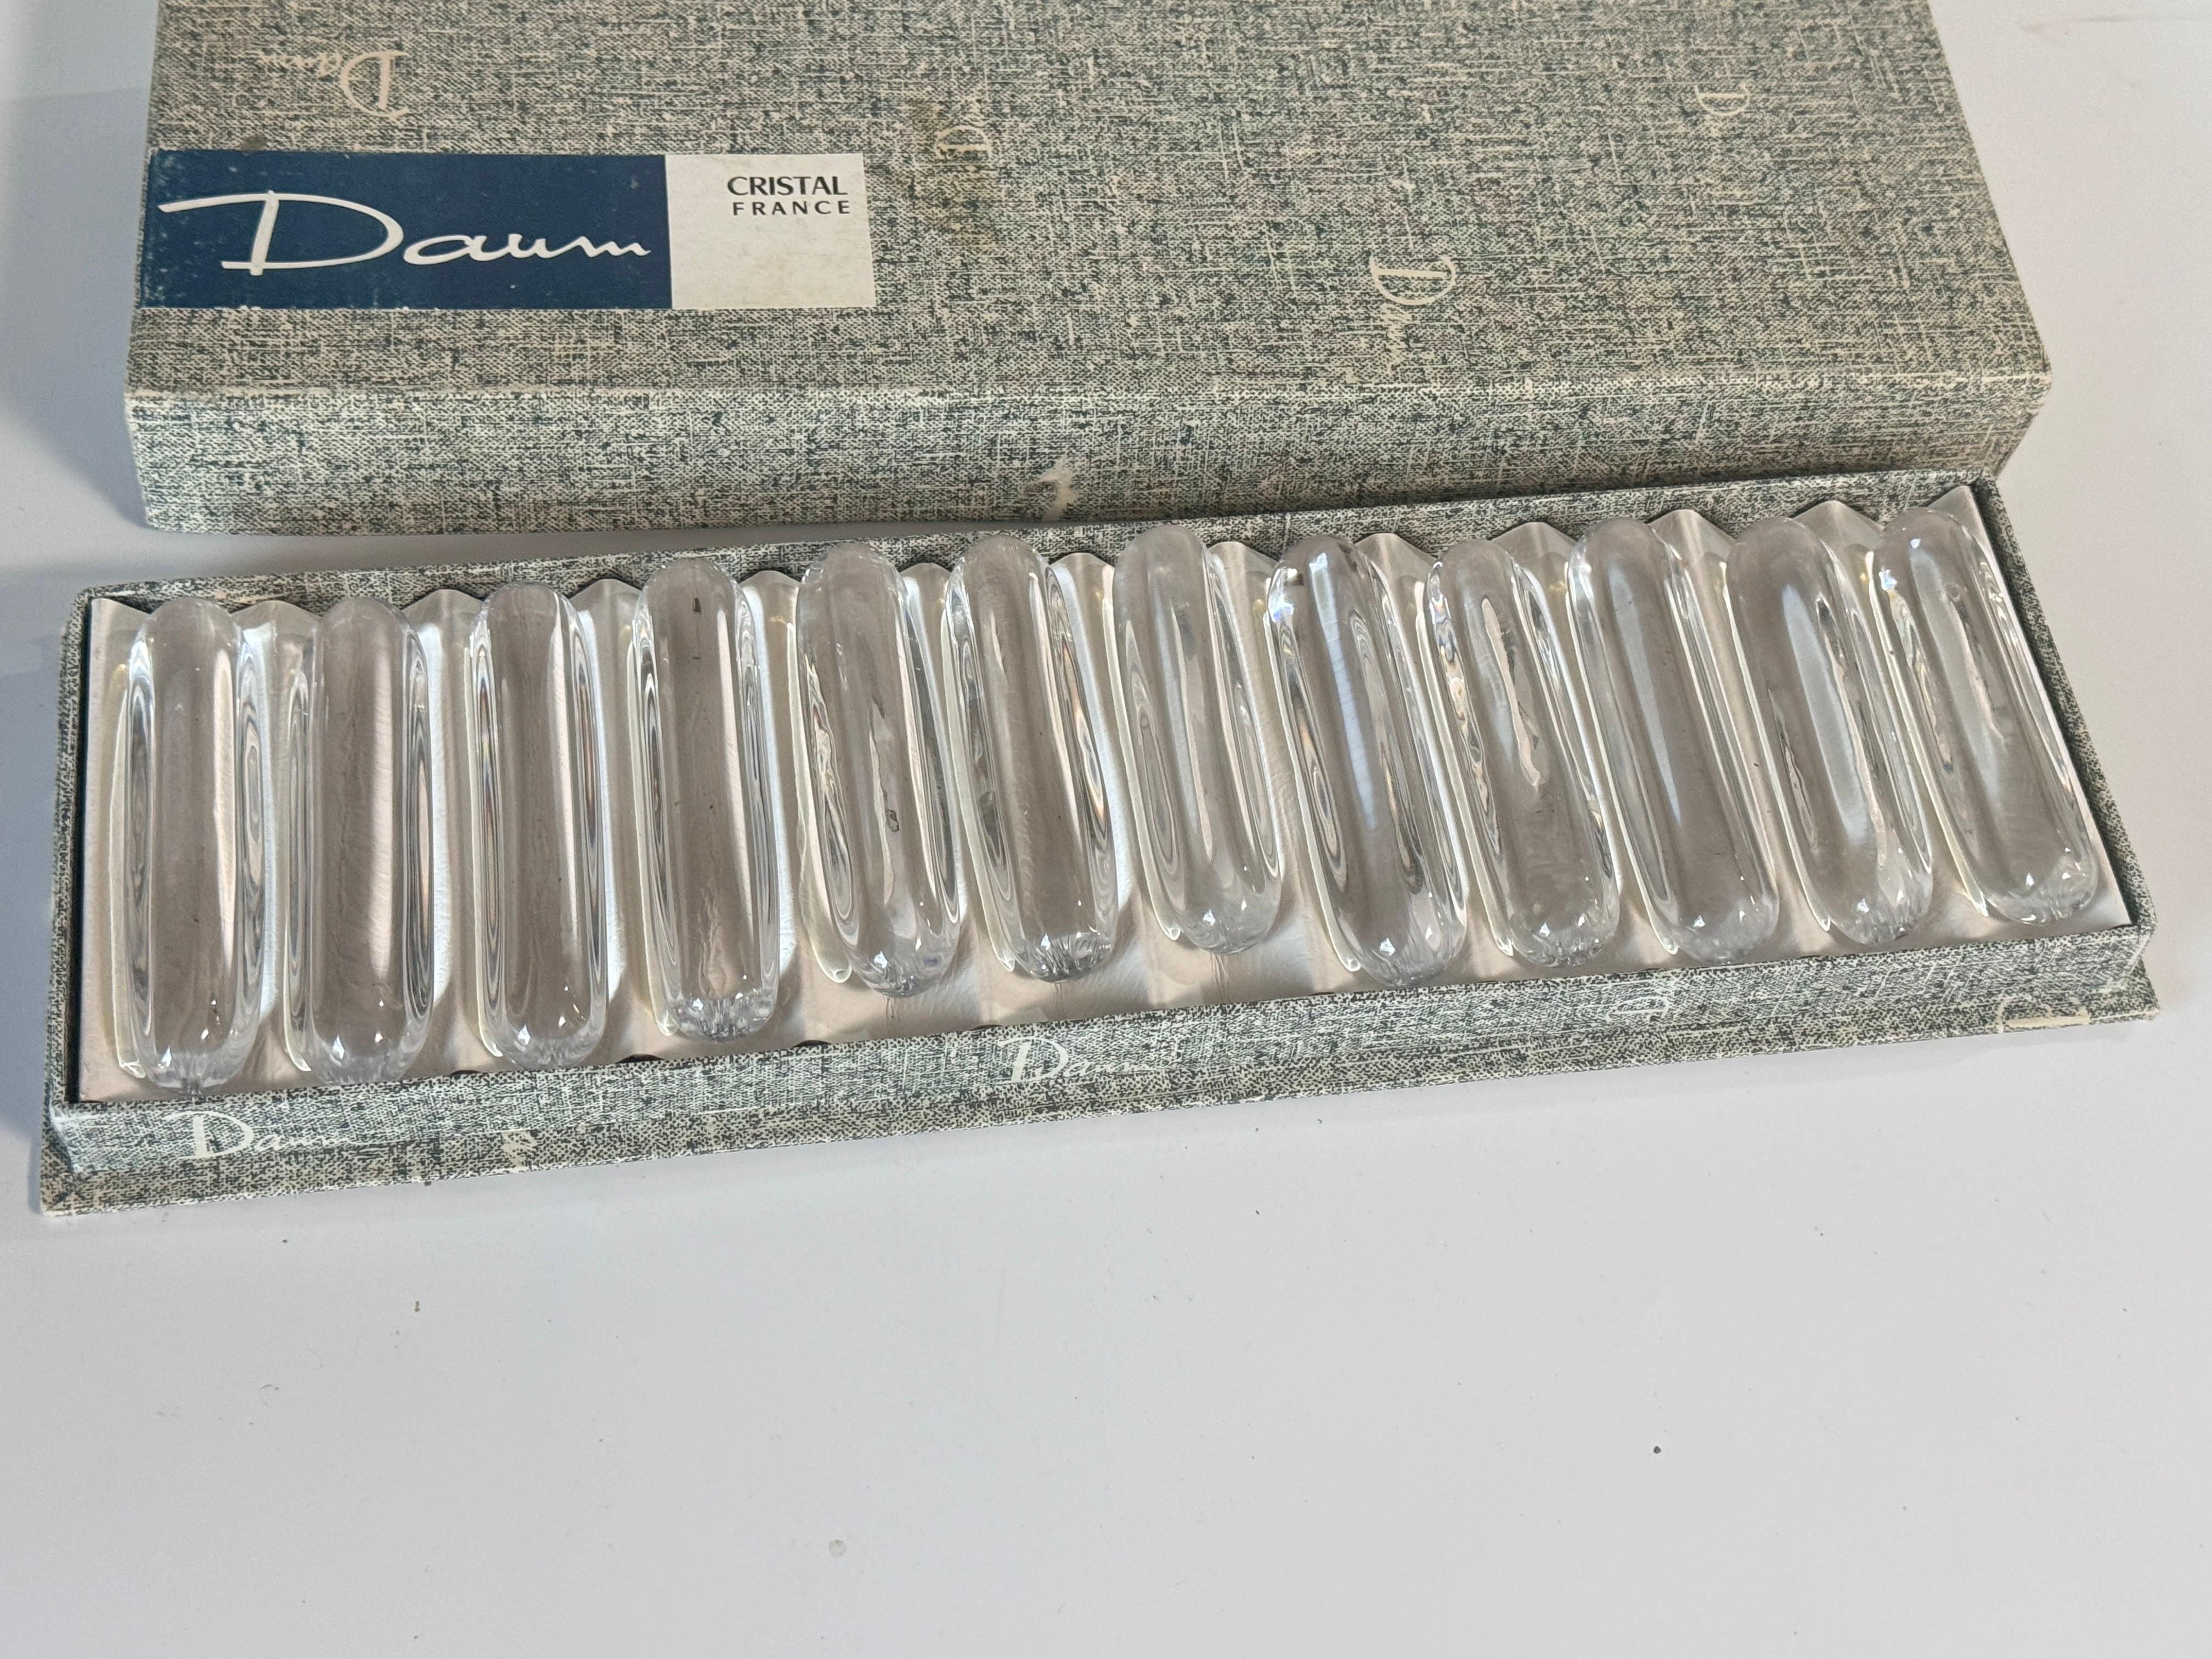 Beautiful set of 12 crystal knife rests from the French brand Daum Nancy. The knife rests have an elegant and simple design, which shows off the quality of the crystal beautifully. It almost looks like drops of water, the crystal is so pure and